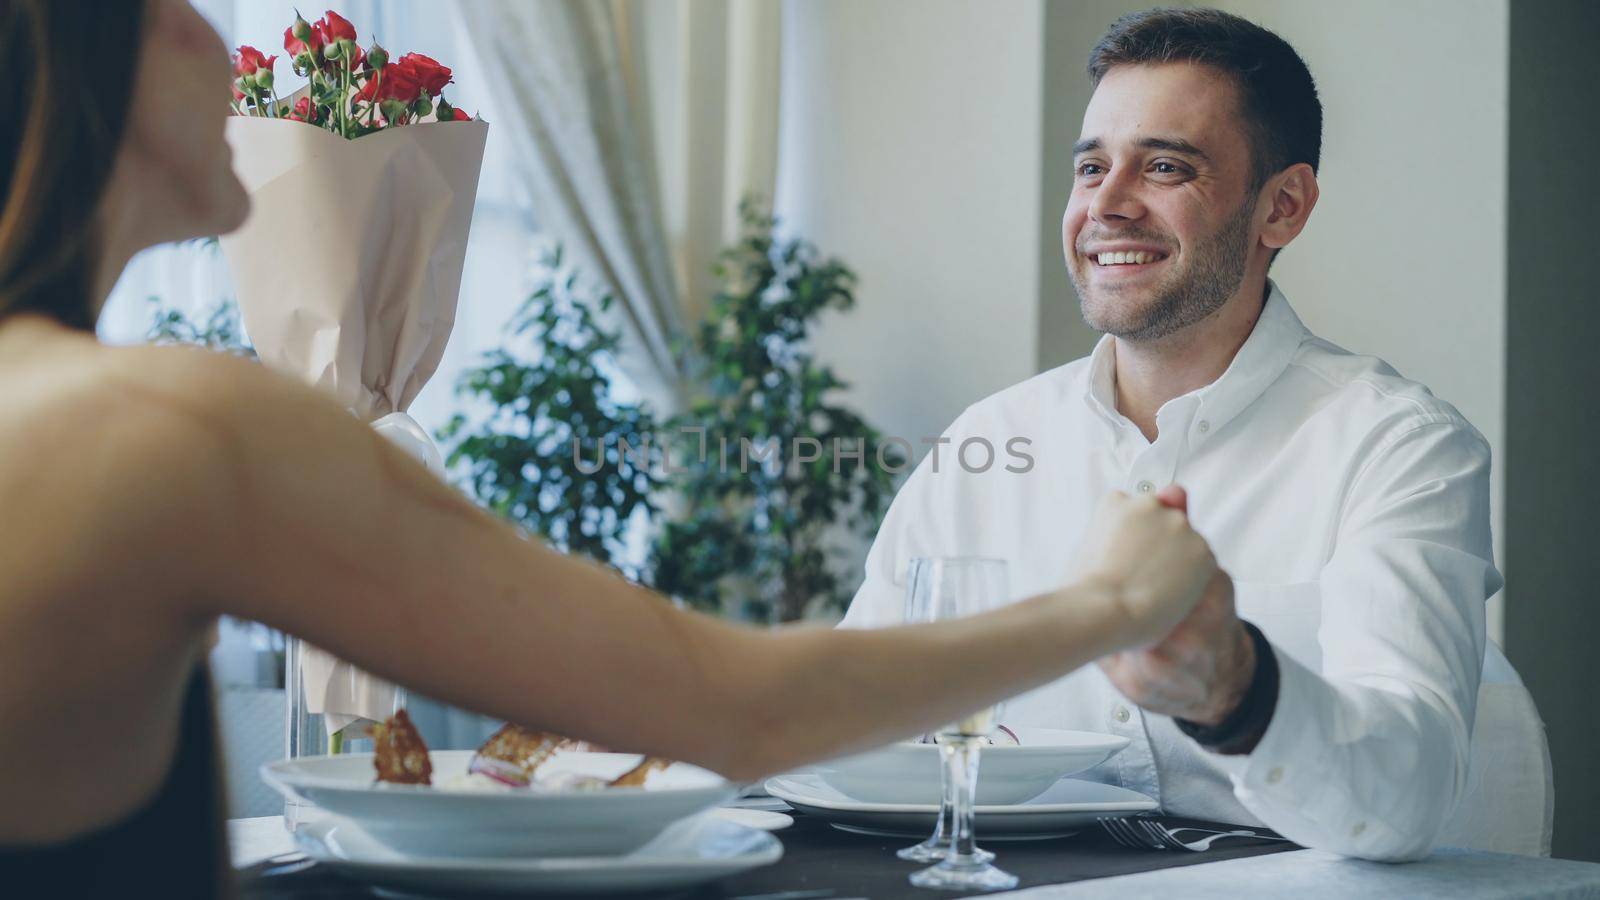 Young handsome man is talking to his girlfriend on date in restaurant, drinking champagne and taking her hand with love and care. Romance and relationships concept. by silverkblack